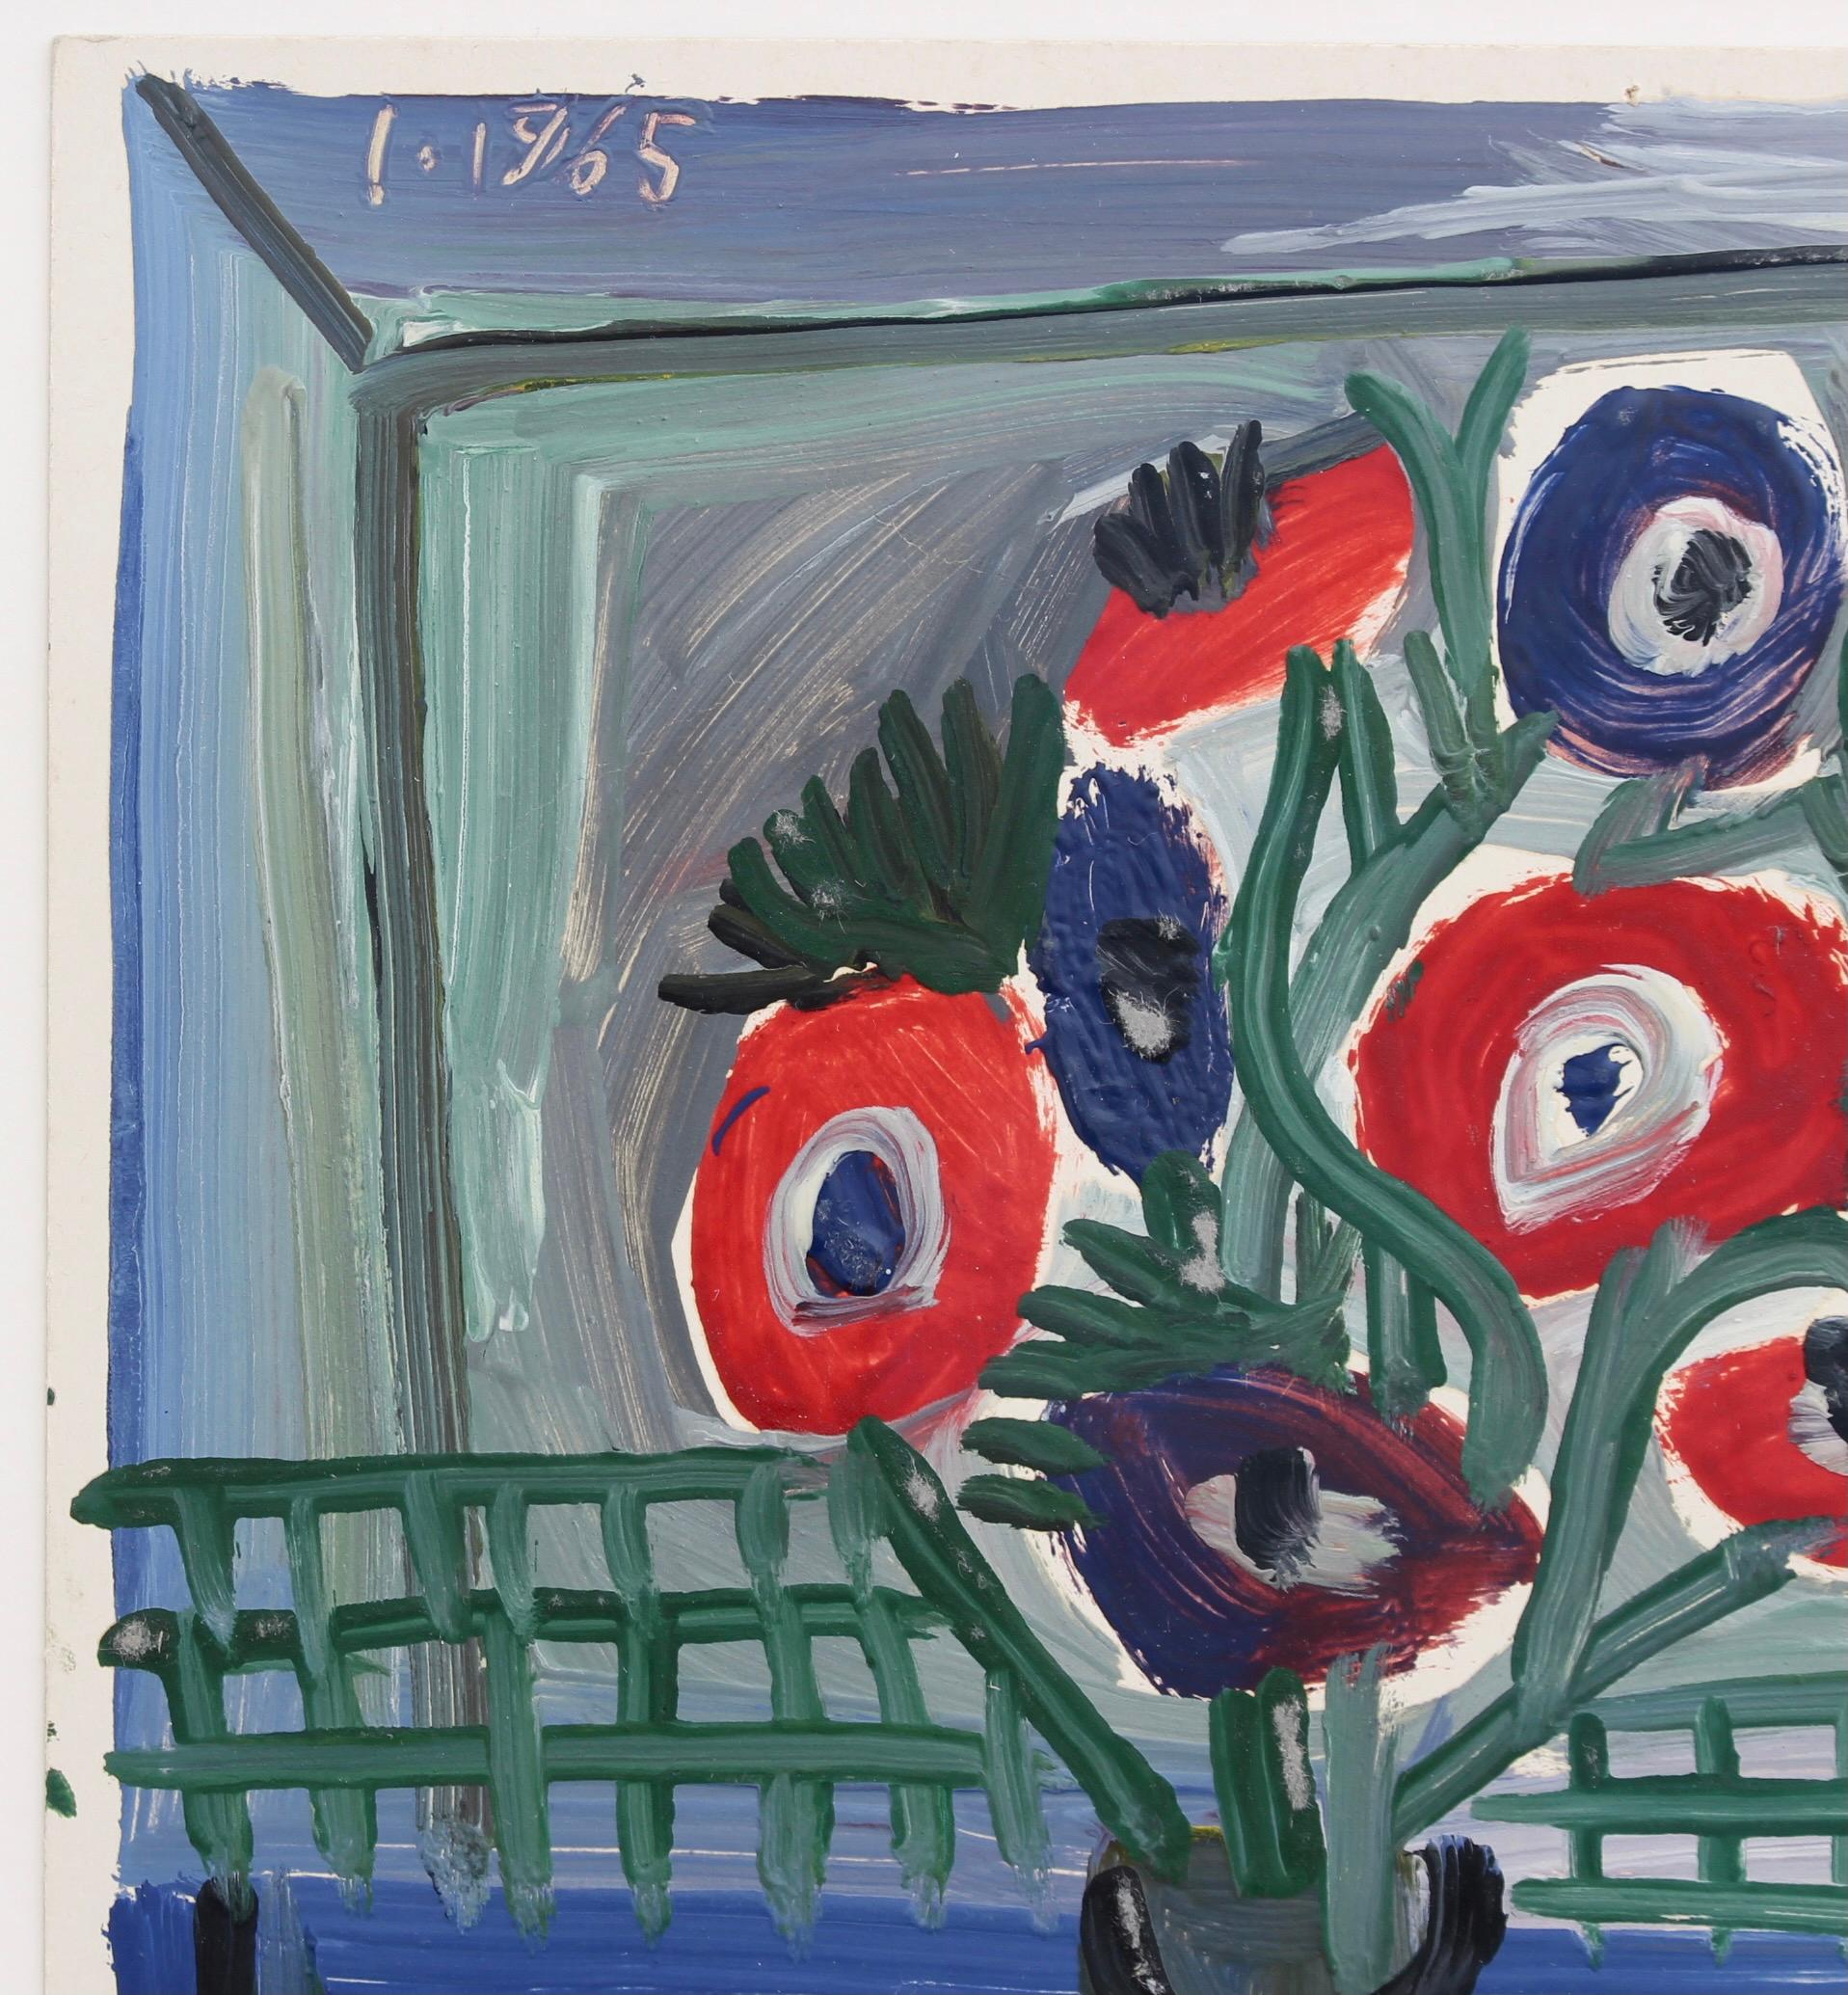 'Boy with Anemones', oil on cardstock paper, by Raymond Debiève (1965). Here the artist paints a young boy having his breakfast with a beautiful bouquet of anemones at the centre of the dining table, in his post-cubist style. Picasso's influence is